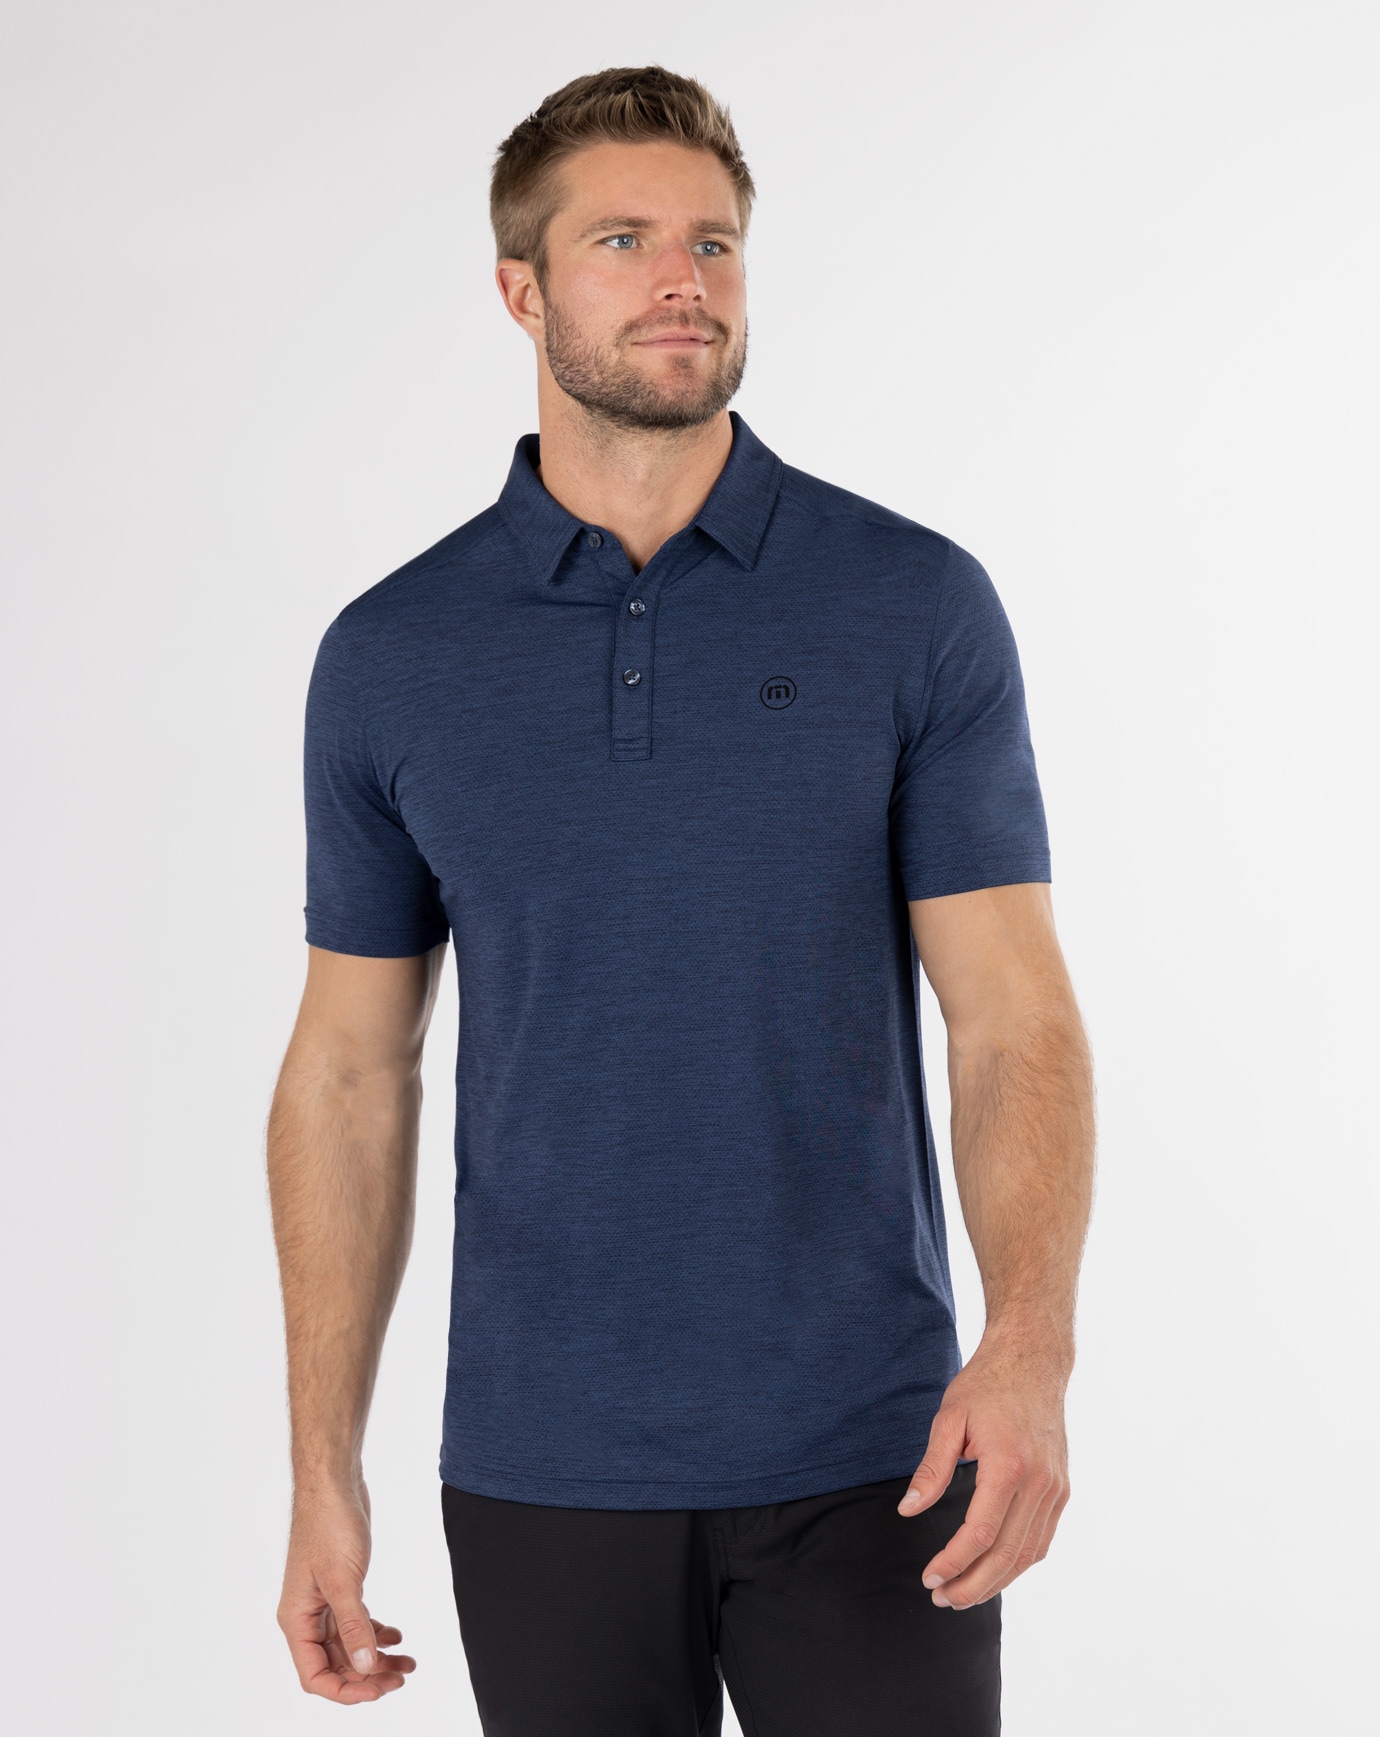 Related Product - HEATING UP GOLF POLO